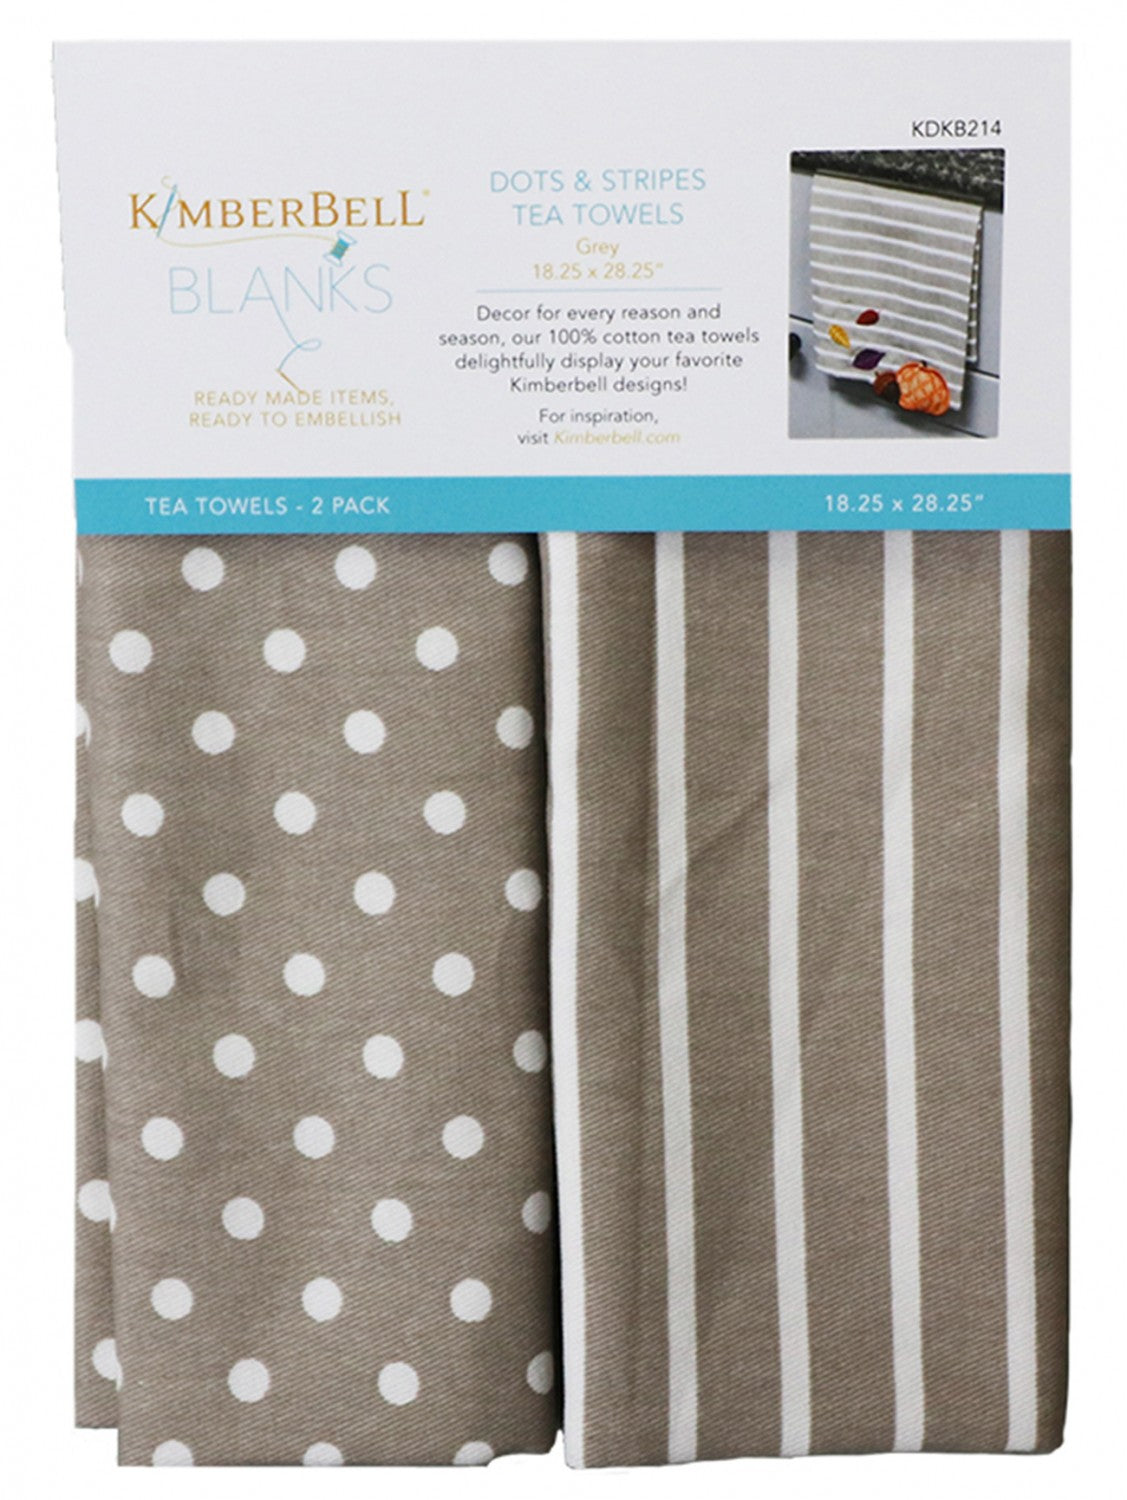 Kimberbell Blanks: Dots and Stripes Tea Towels, Multicolored